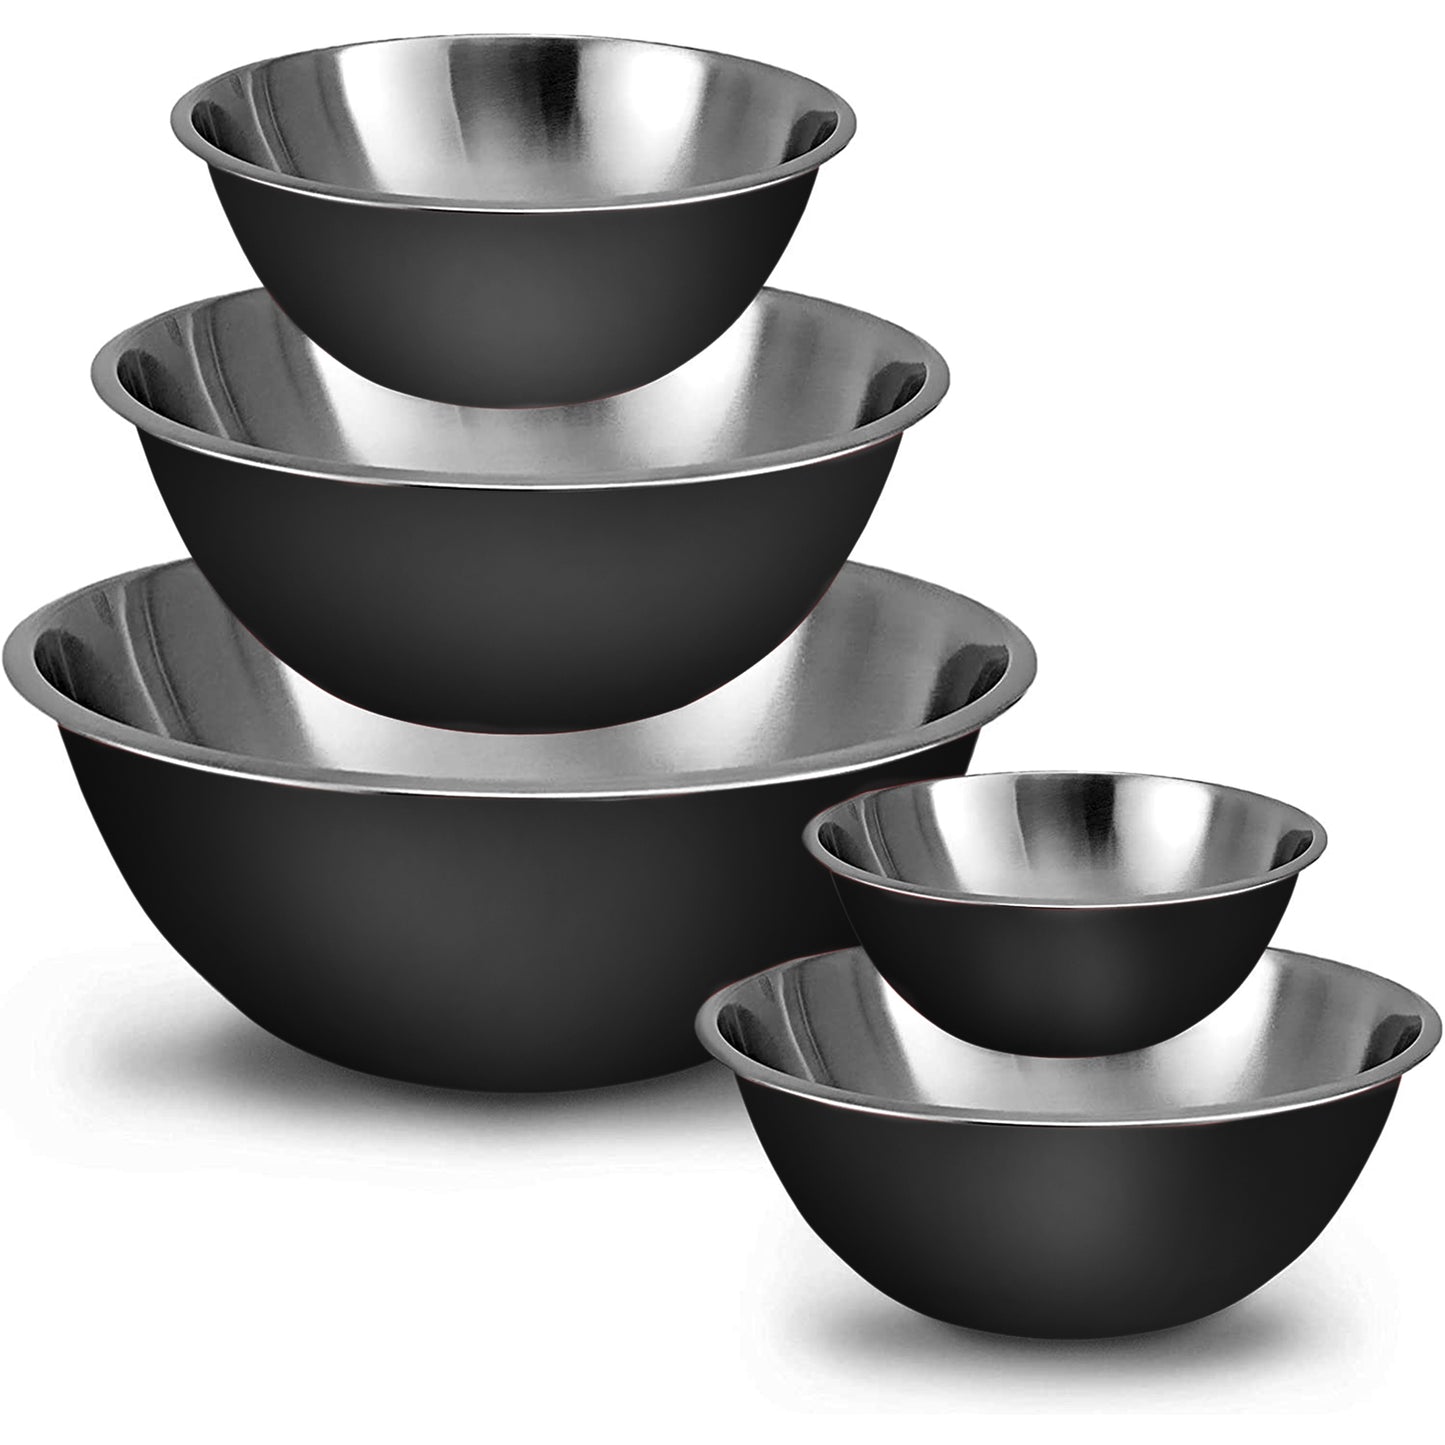 Stainless Steel Mixing Bowls Set - Black